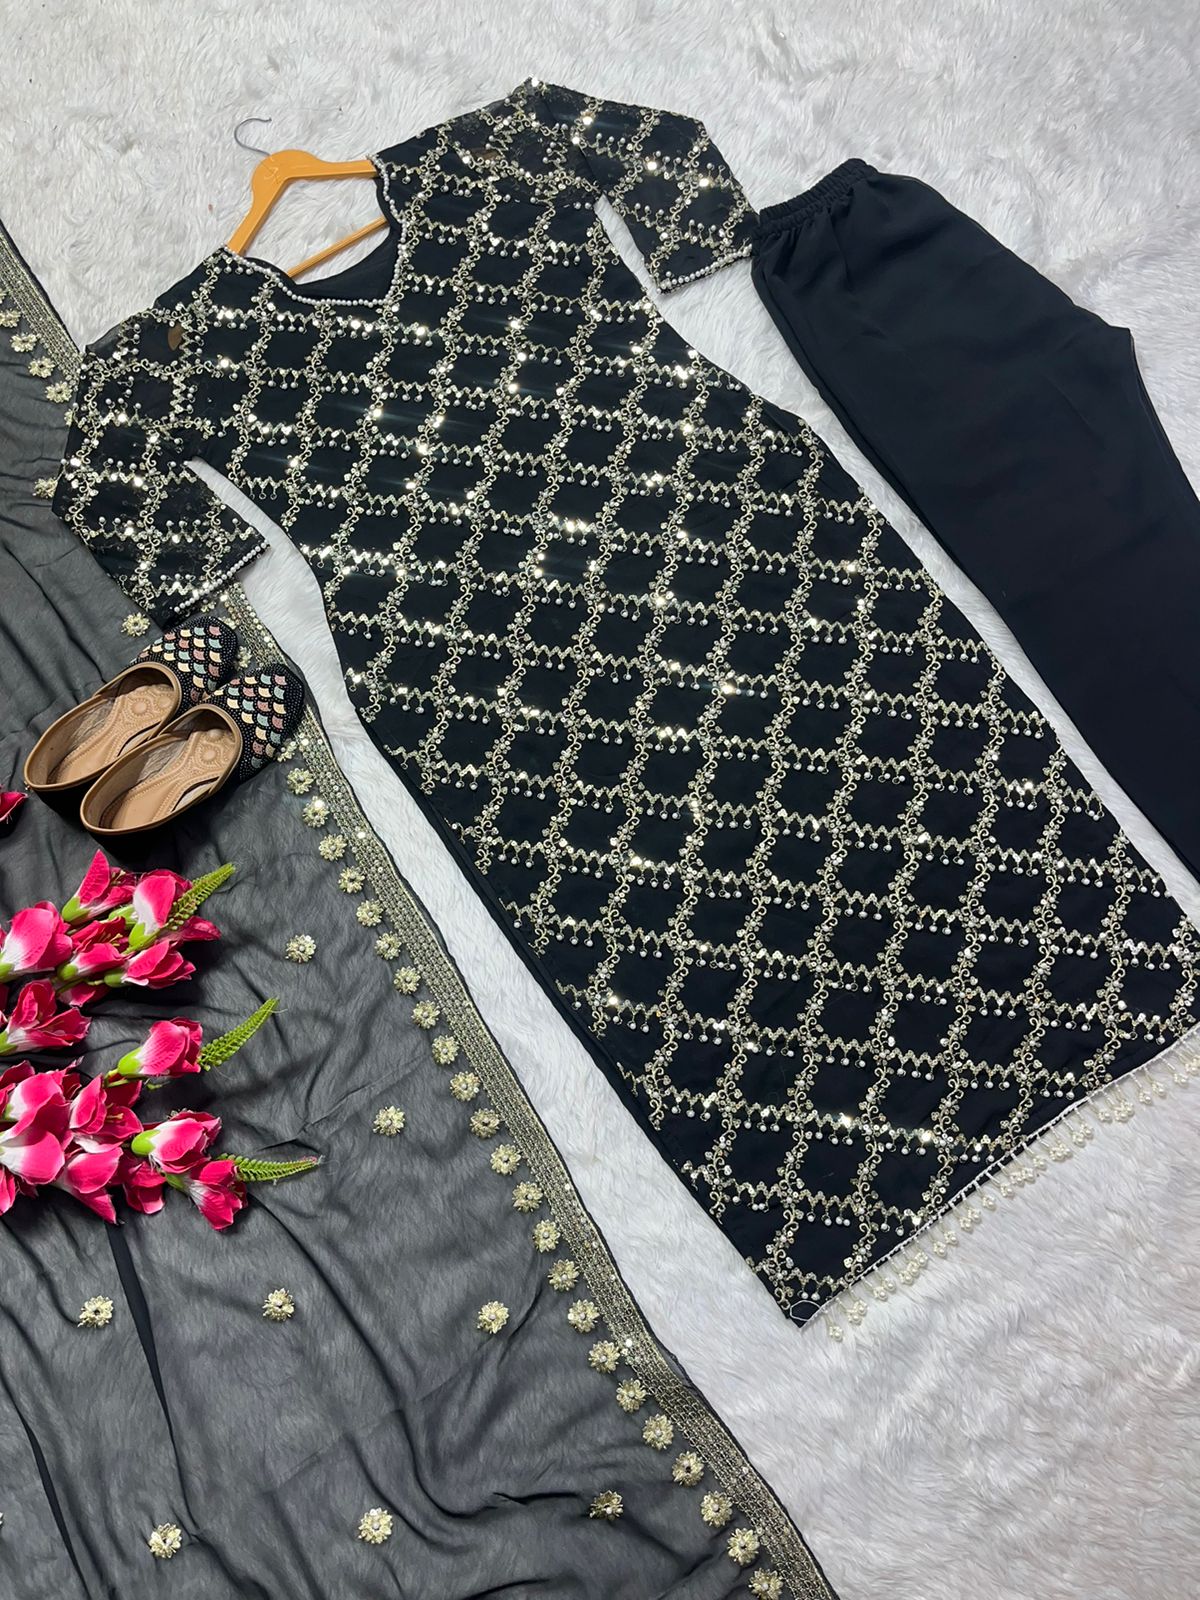 Glorious Black Color Full Embroidery Work Salwar Suit